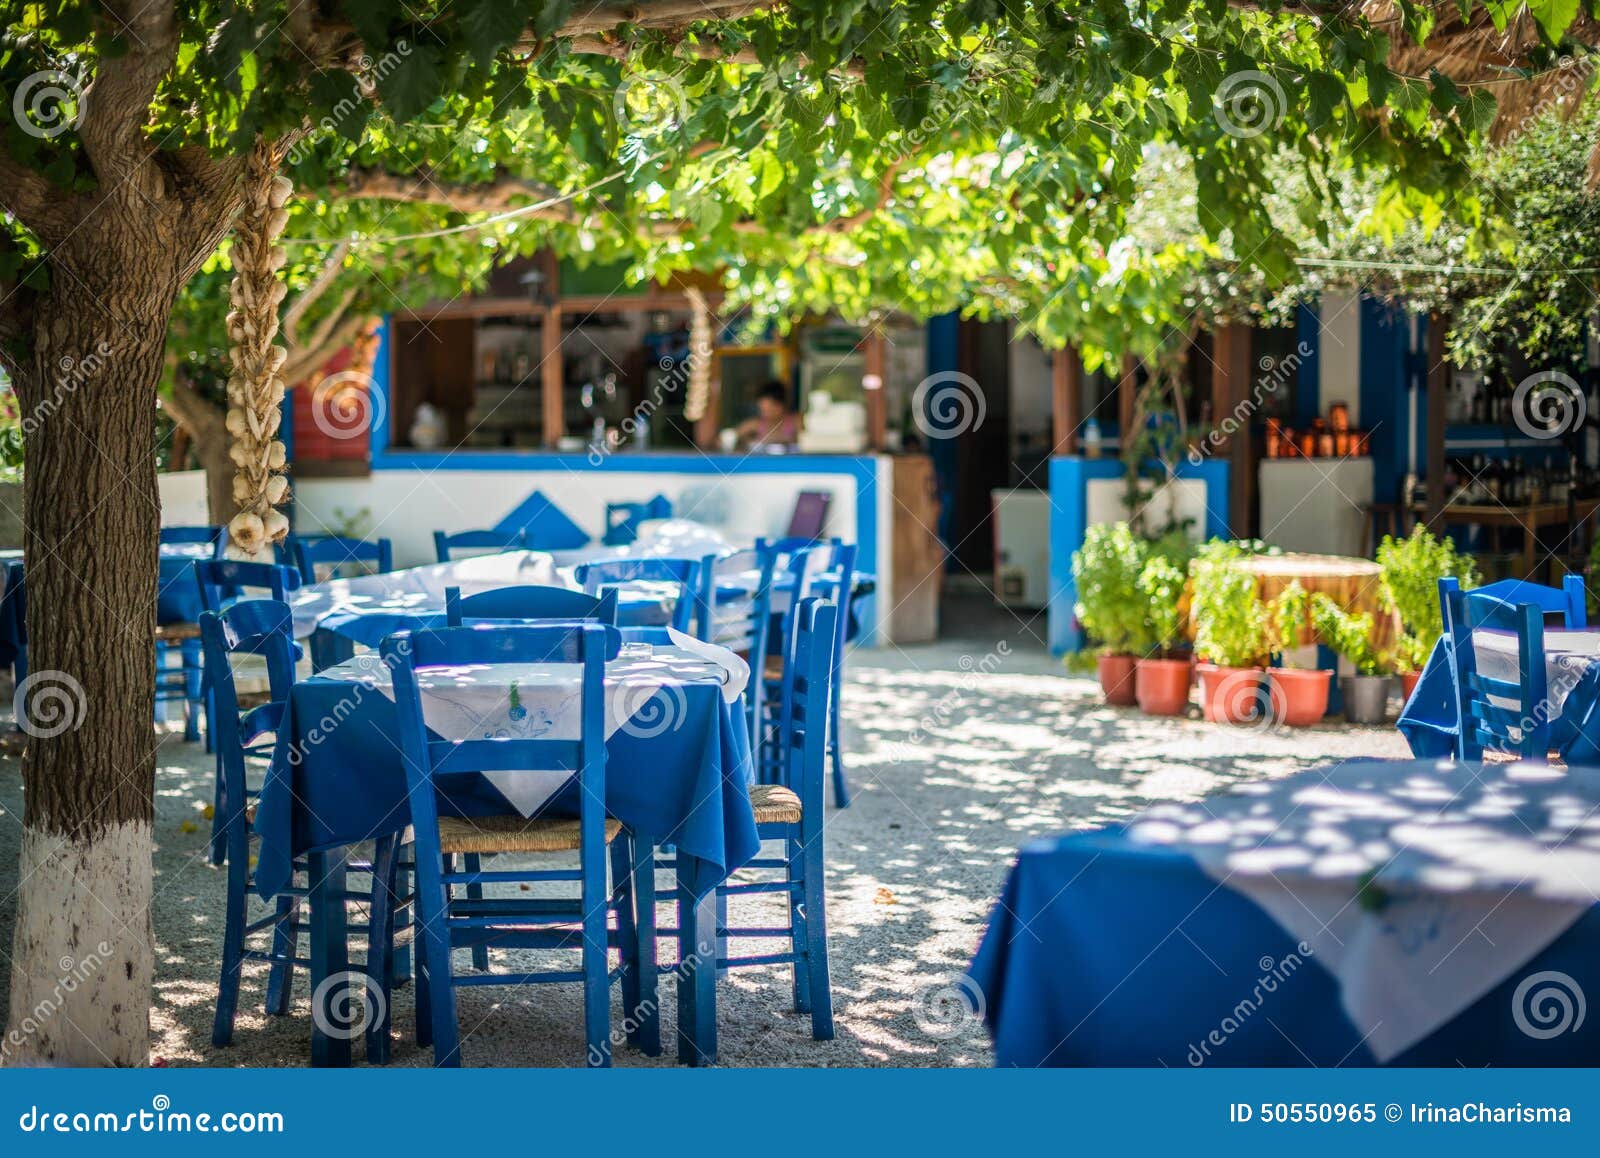 Greek Traditional Tavern On The Street Stock Photo - Image: 50550965